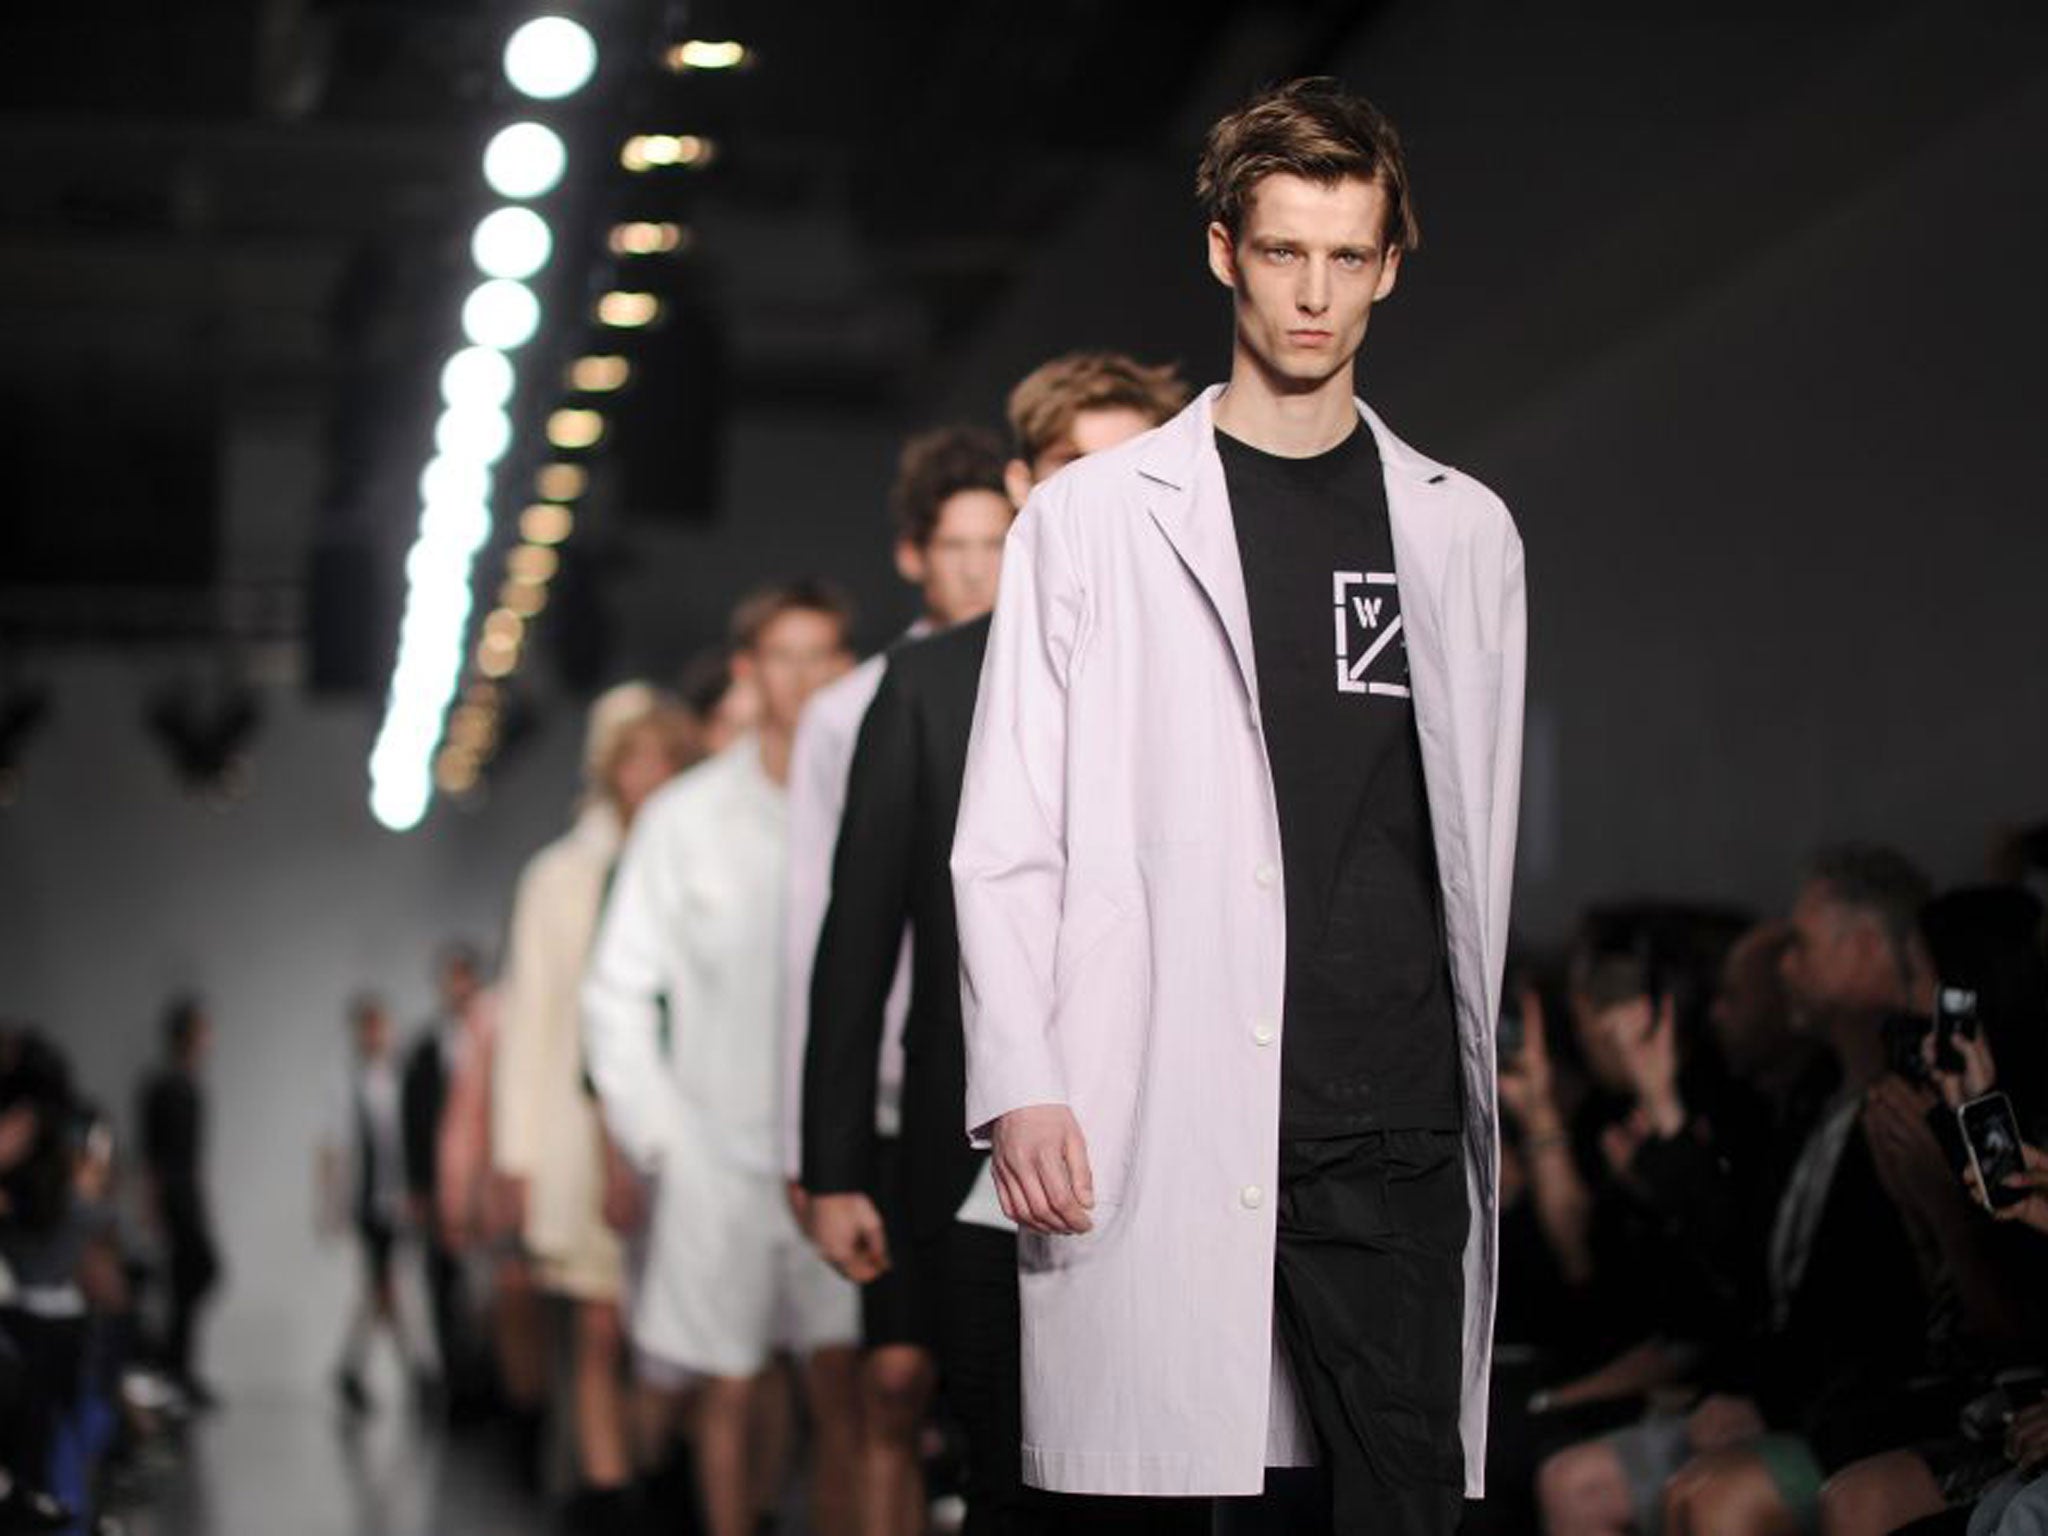 The third instalment of London’s dedicated menswear event began yesterday with shows from Lou Dalton